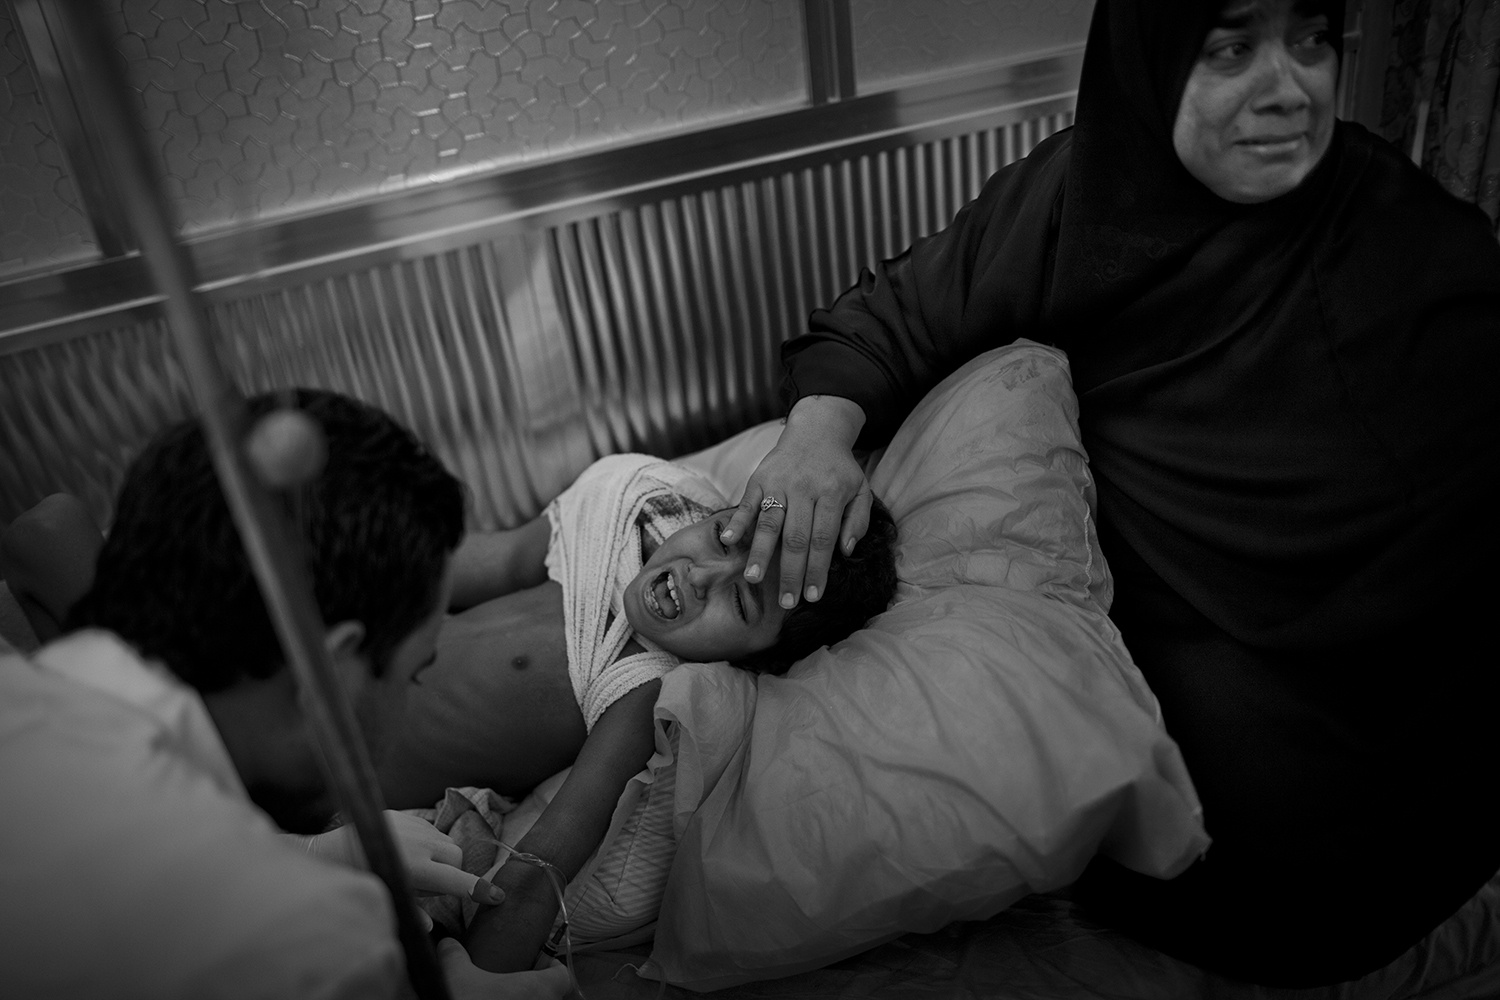 Oct. 24, 2012. Near Basra. A 10-year-old boy receives dialysis at a hospital as his mother prays and rests her hand on his head. A large portion of a tumor on his shoulder was removed the day earlier.